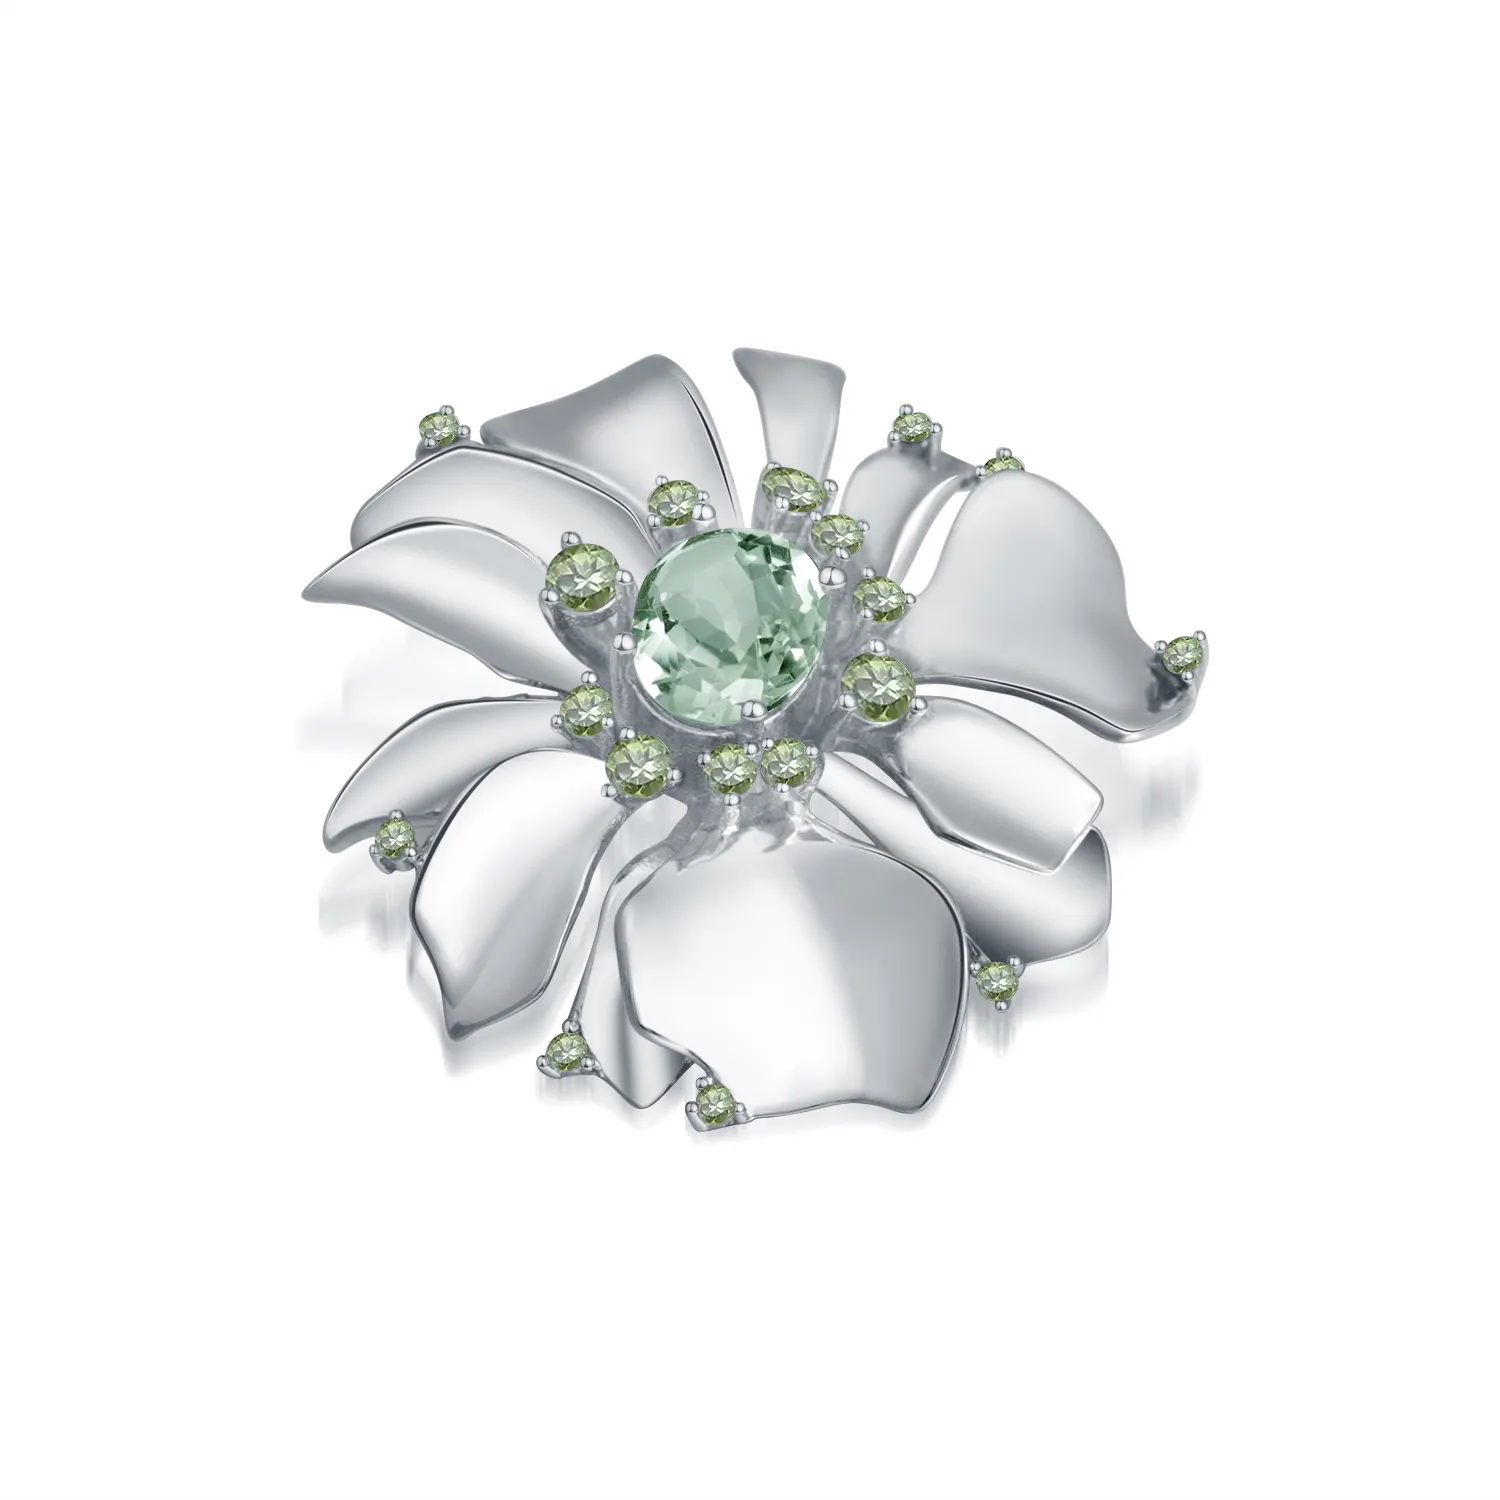 C5816BH Abiding Fine Jewelry The New Listing Natural Crystal Oval 8X10 Stone Prasiolite 925 Sterling Silver Flower Brooch